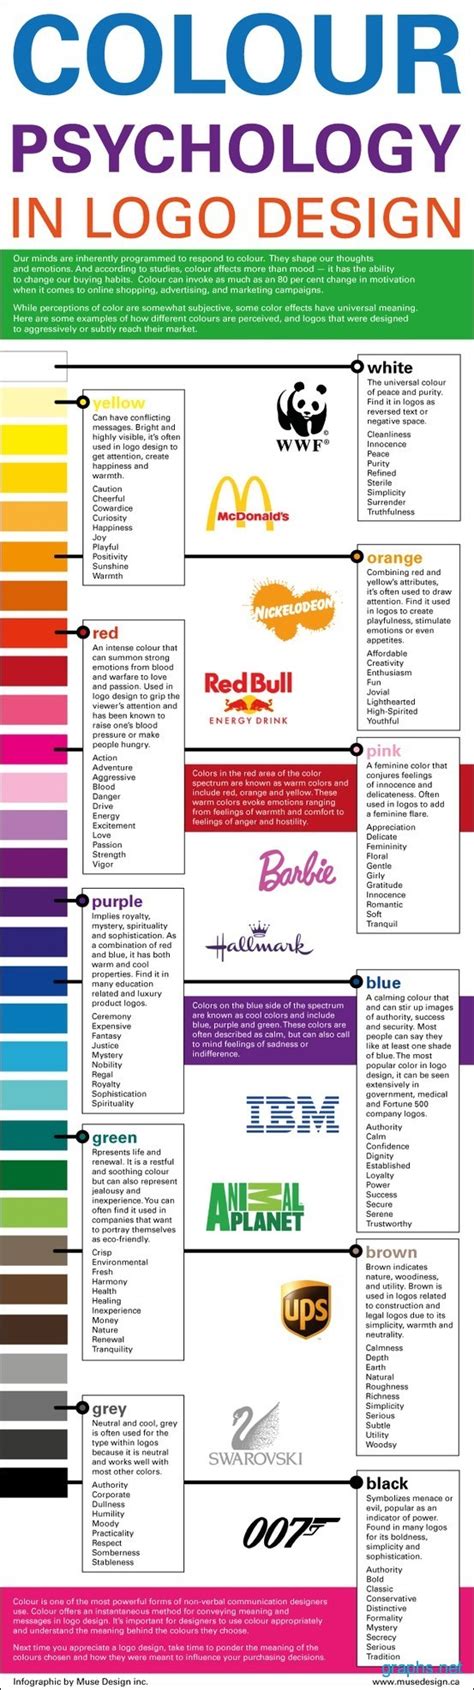 Meaning of Colours in Logo Design - Infographics | Graphs.net